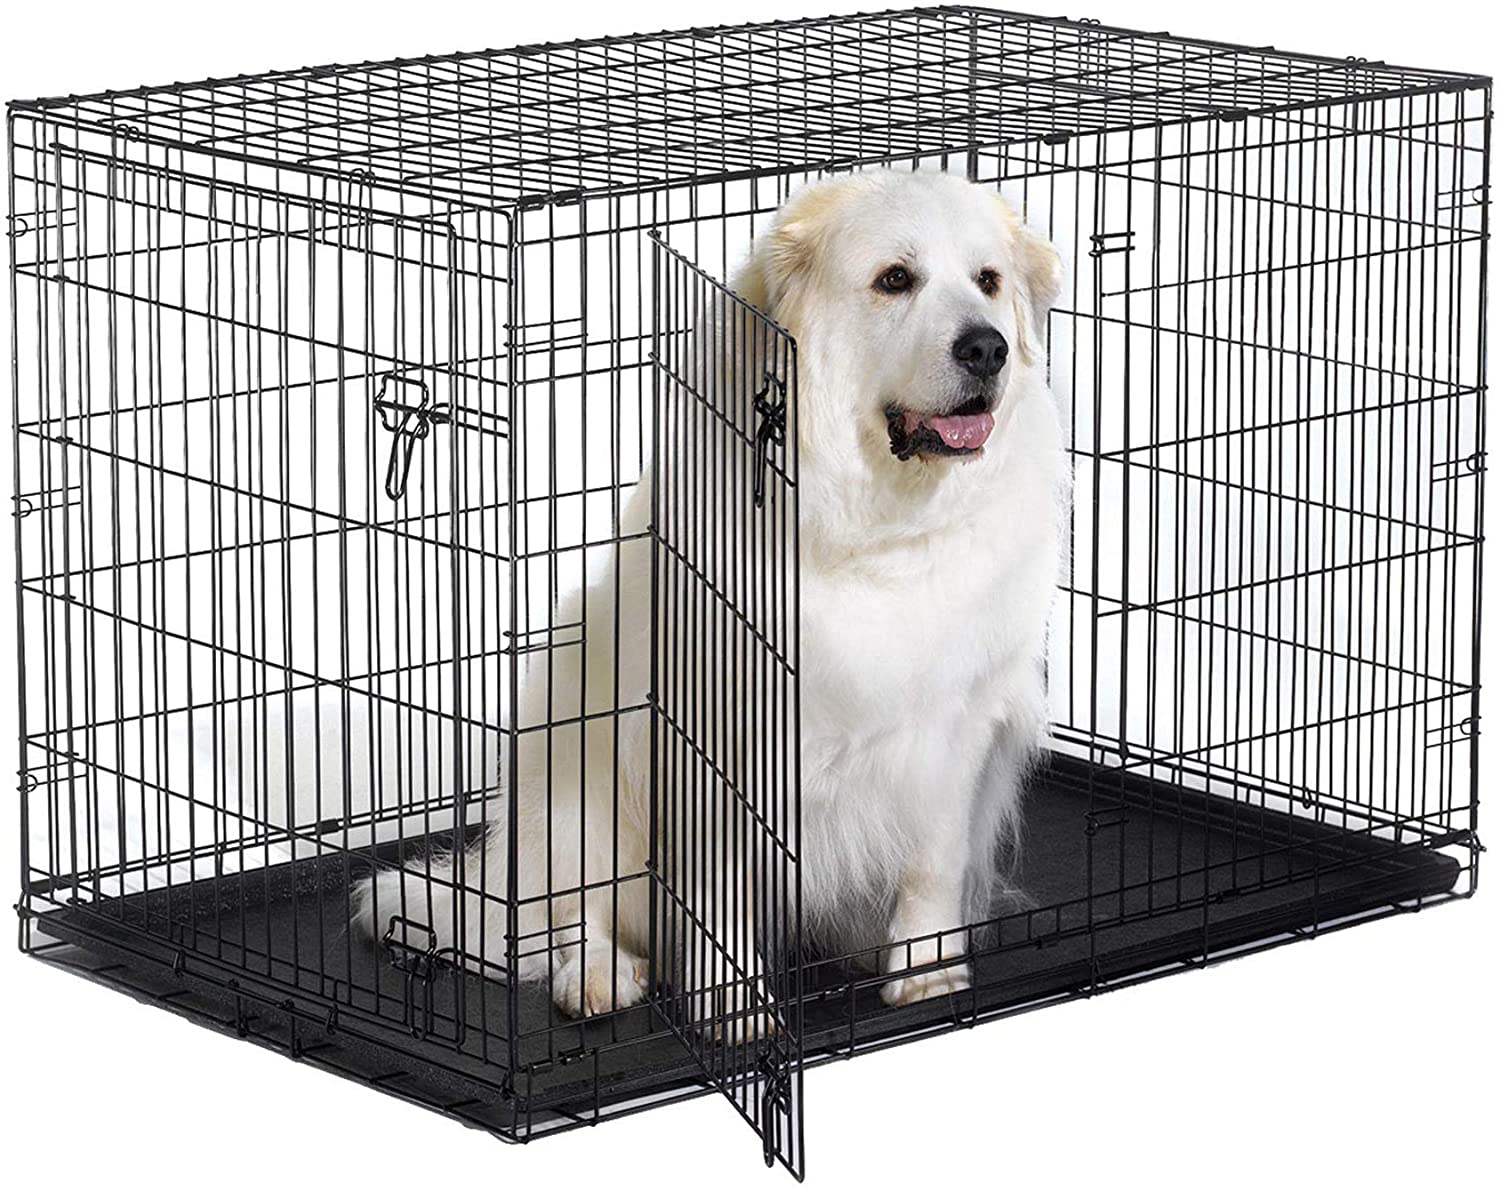 New-World-Pet-Products-Folding-Metal-Dog-Crate